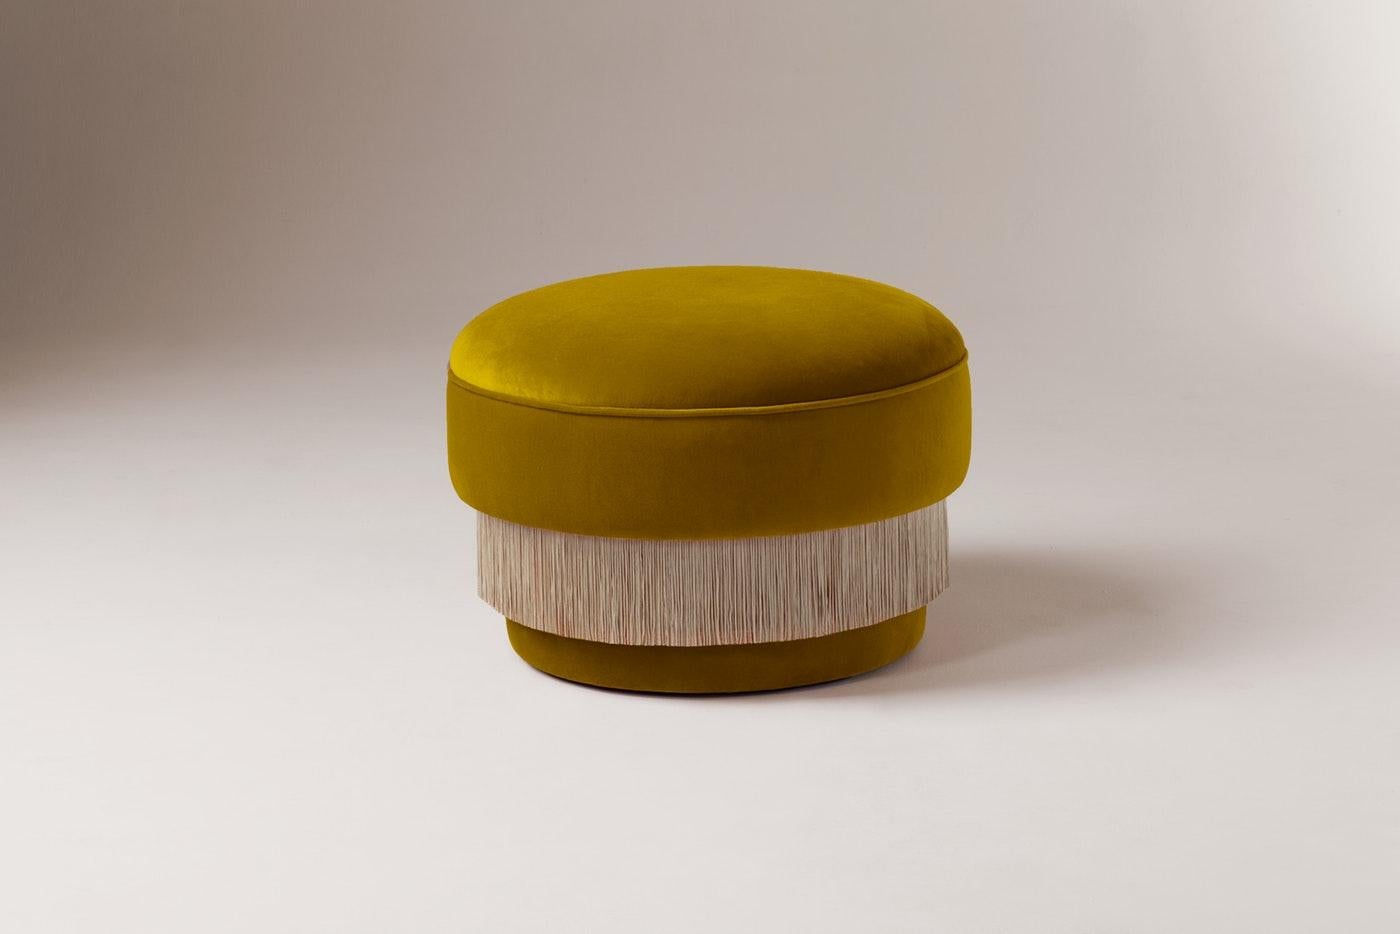 Folie pouf by Dooq
Measures: Ø 64 cm 25”
H 44 cm 17”

Materials: Upholstery and piping fabric or leather

Dooq is a design company dedicated to celebrate the luxury of living. Creating designs that stimulate the senses, whose conceptual